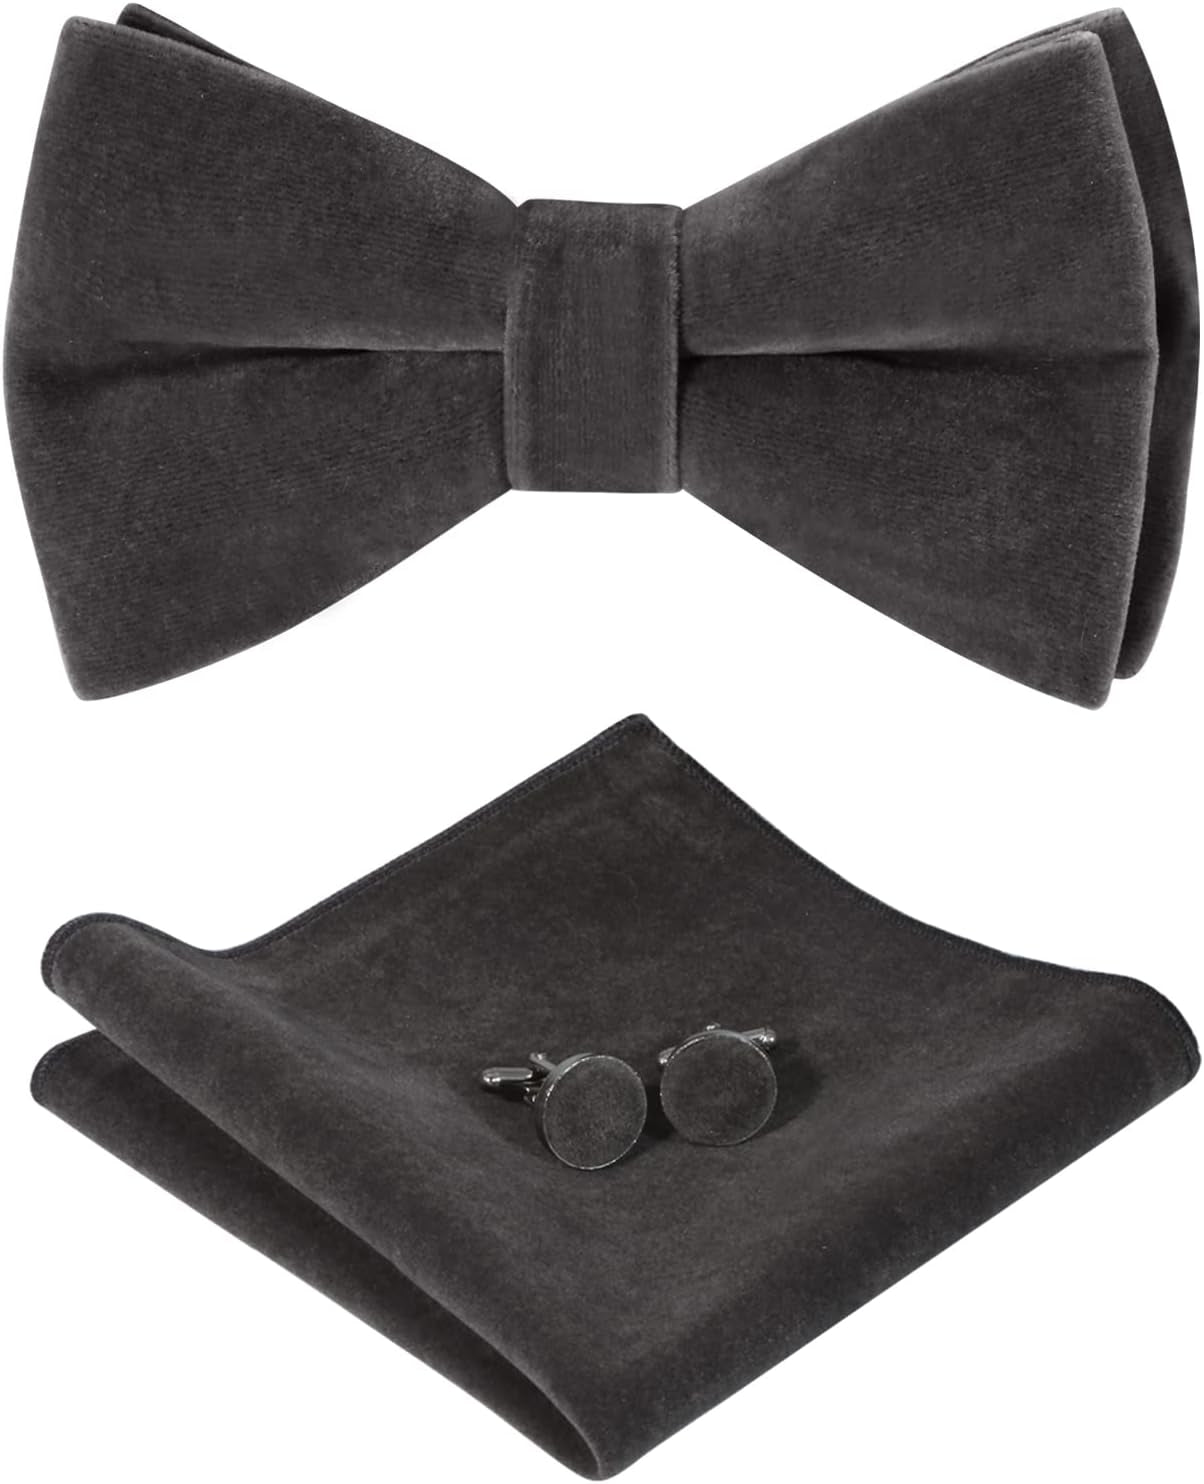 HOULIFE Men'S Pre-Tied Bowties Velvet Solid Color Adjustable Bow Tie and Pocket Square with Cufflinks for Wedding Party